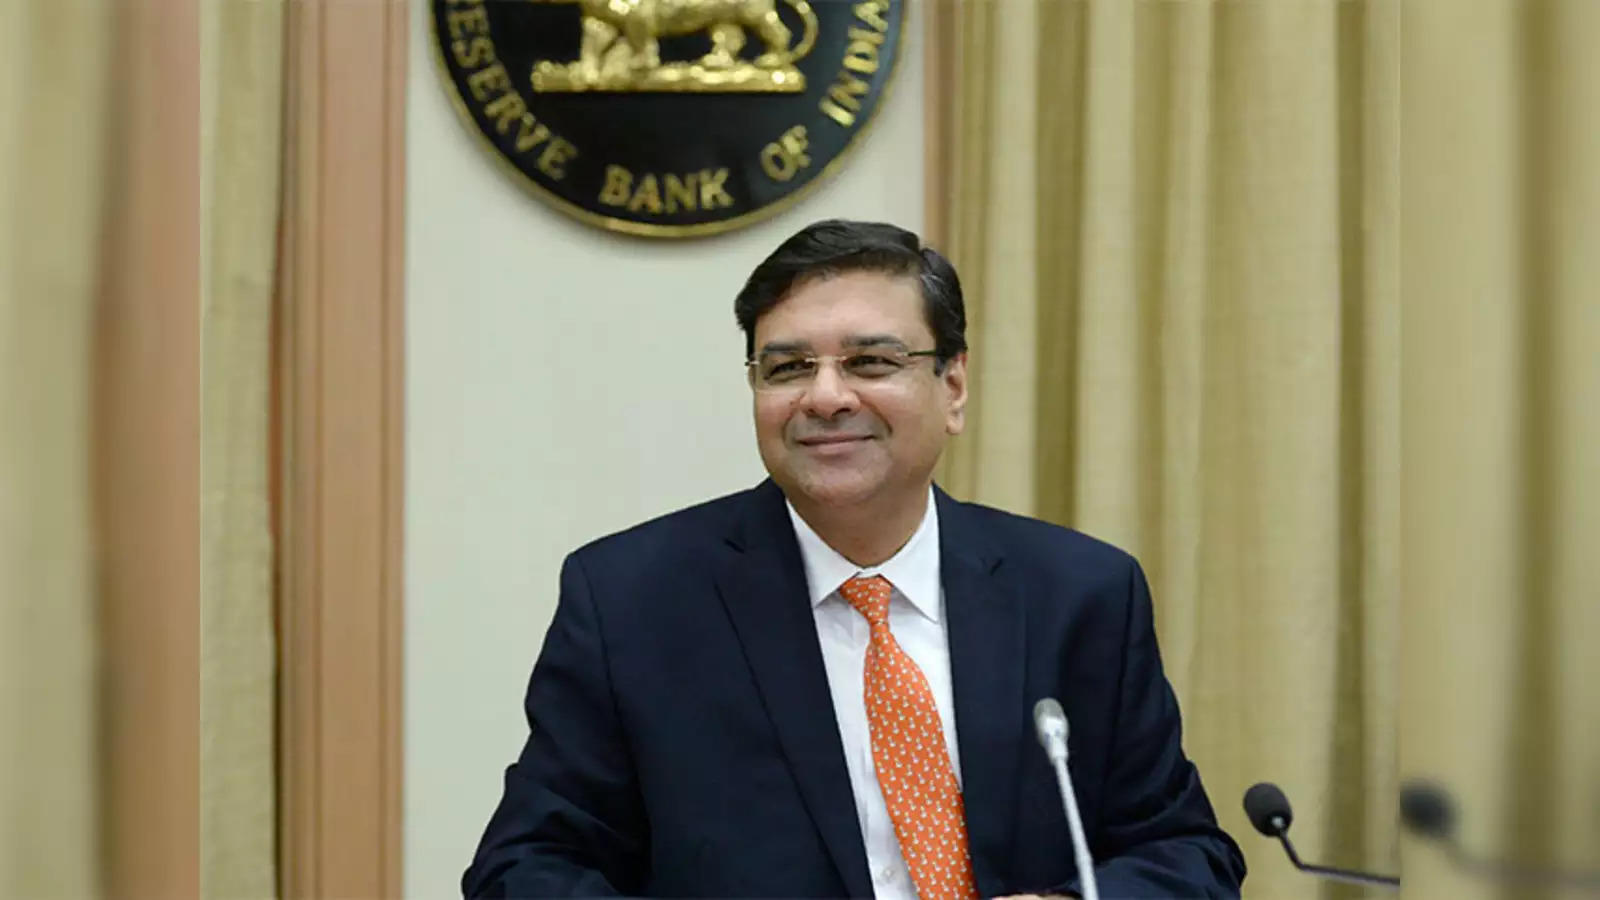 Former RBI Guv Urjit Patel set to join Britsnis board again 